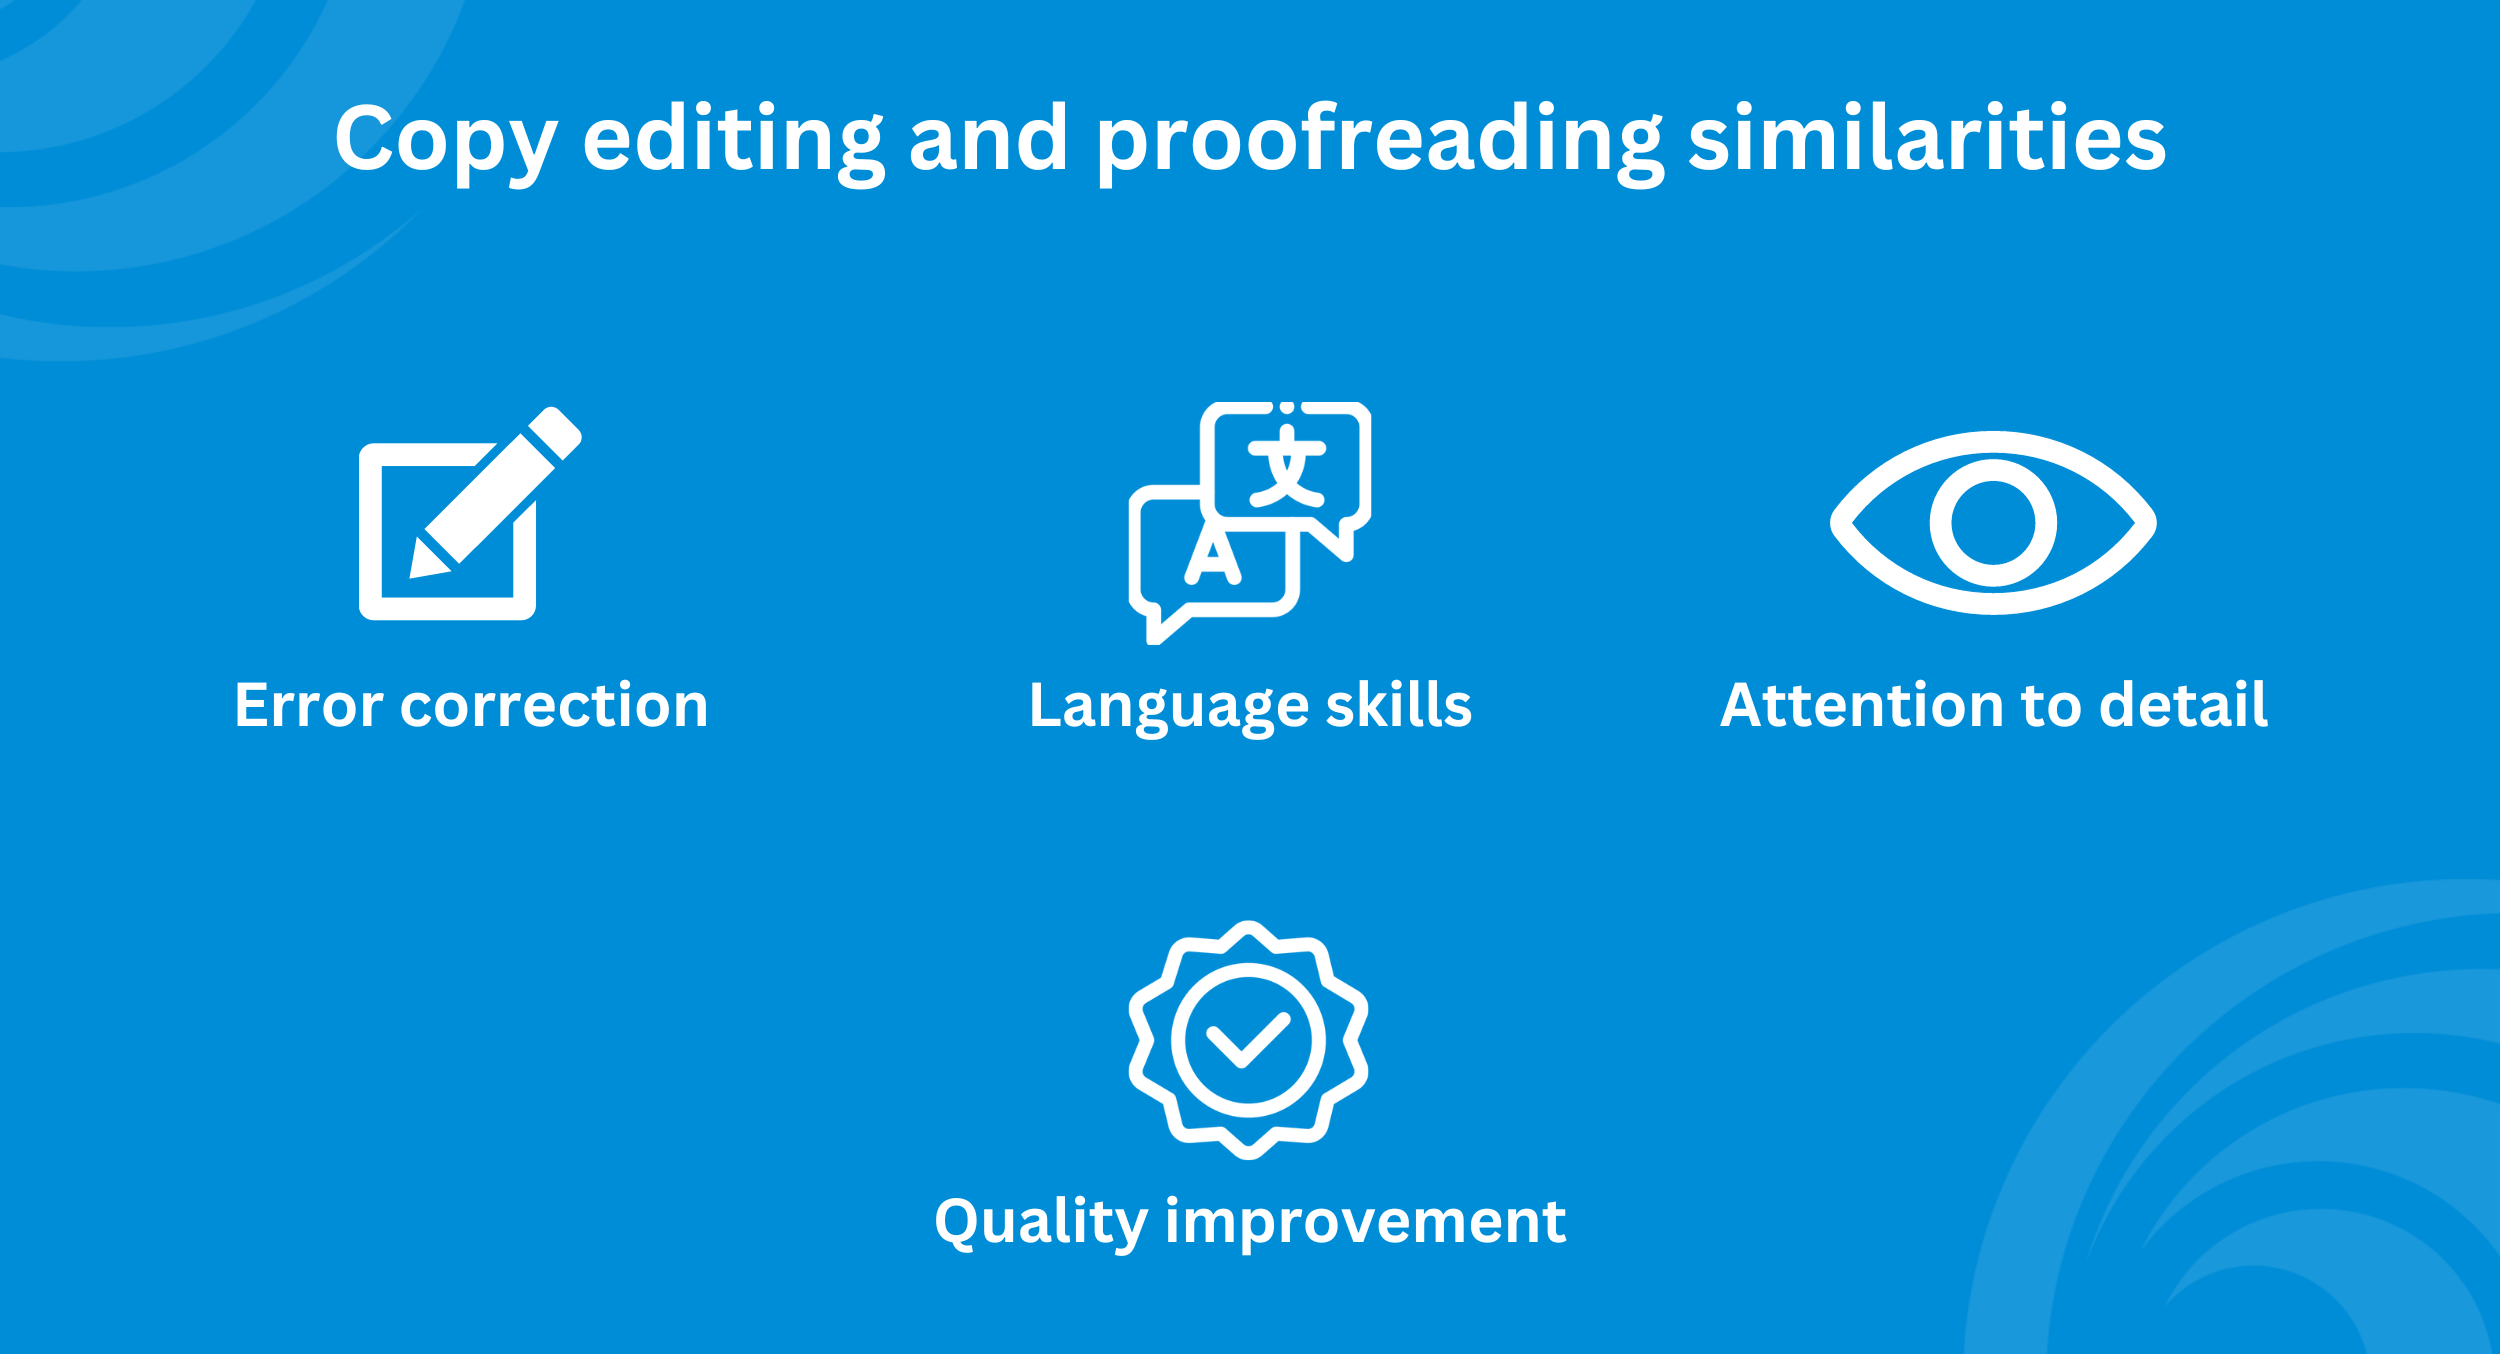 Copy editing and proofreading img 1